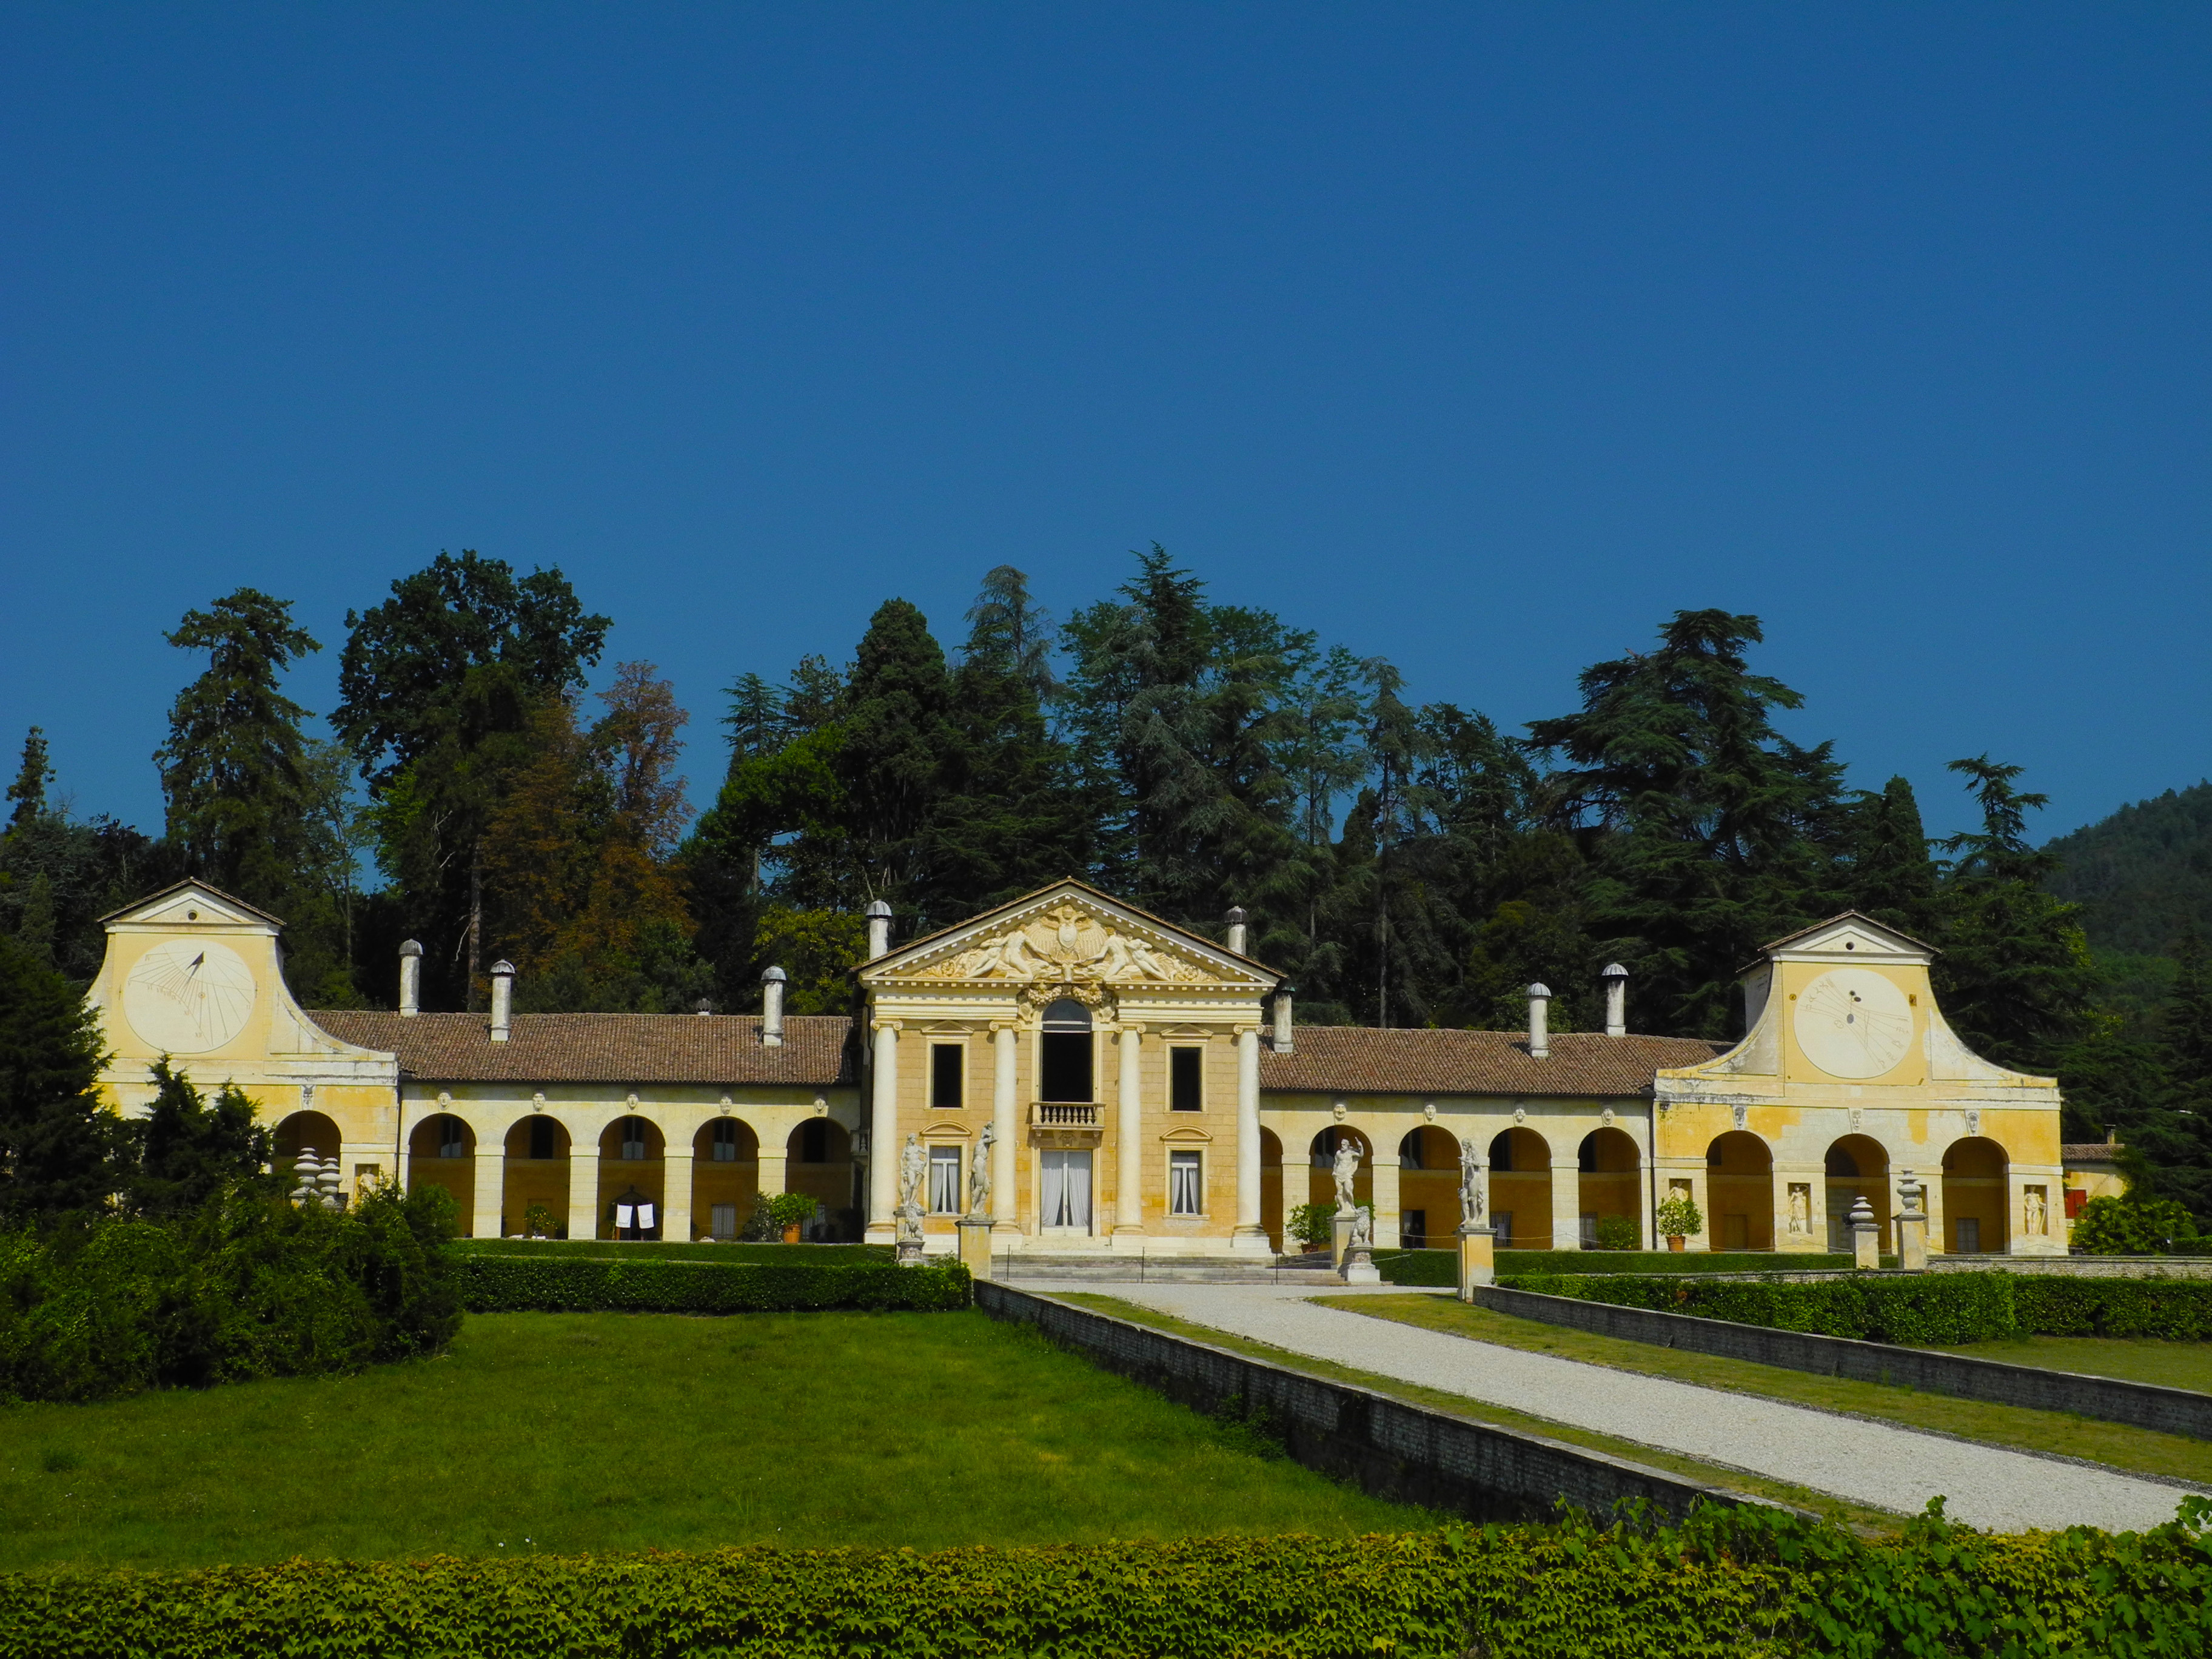 itinerary: white and yellow Palladian villa with green lawn in front